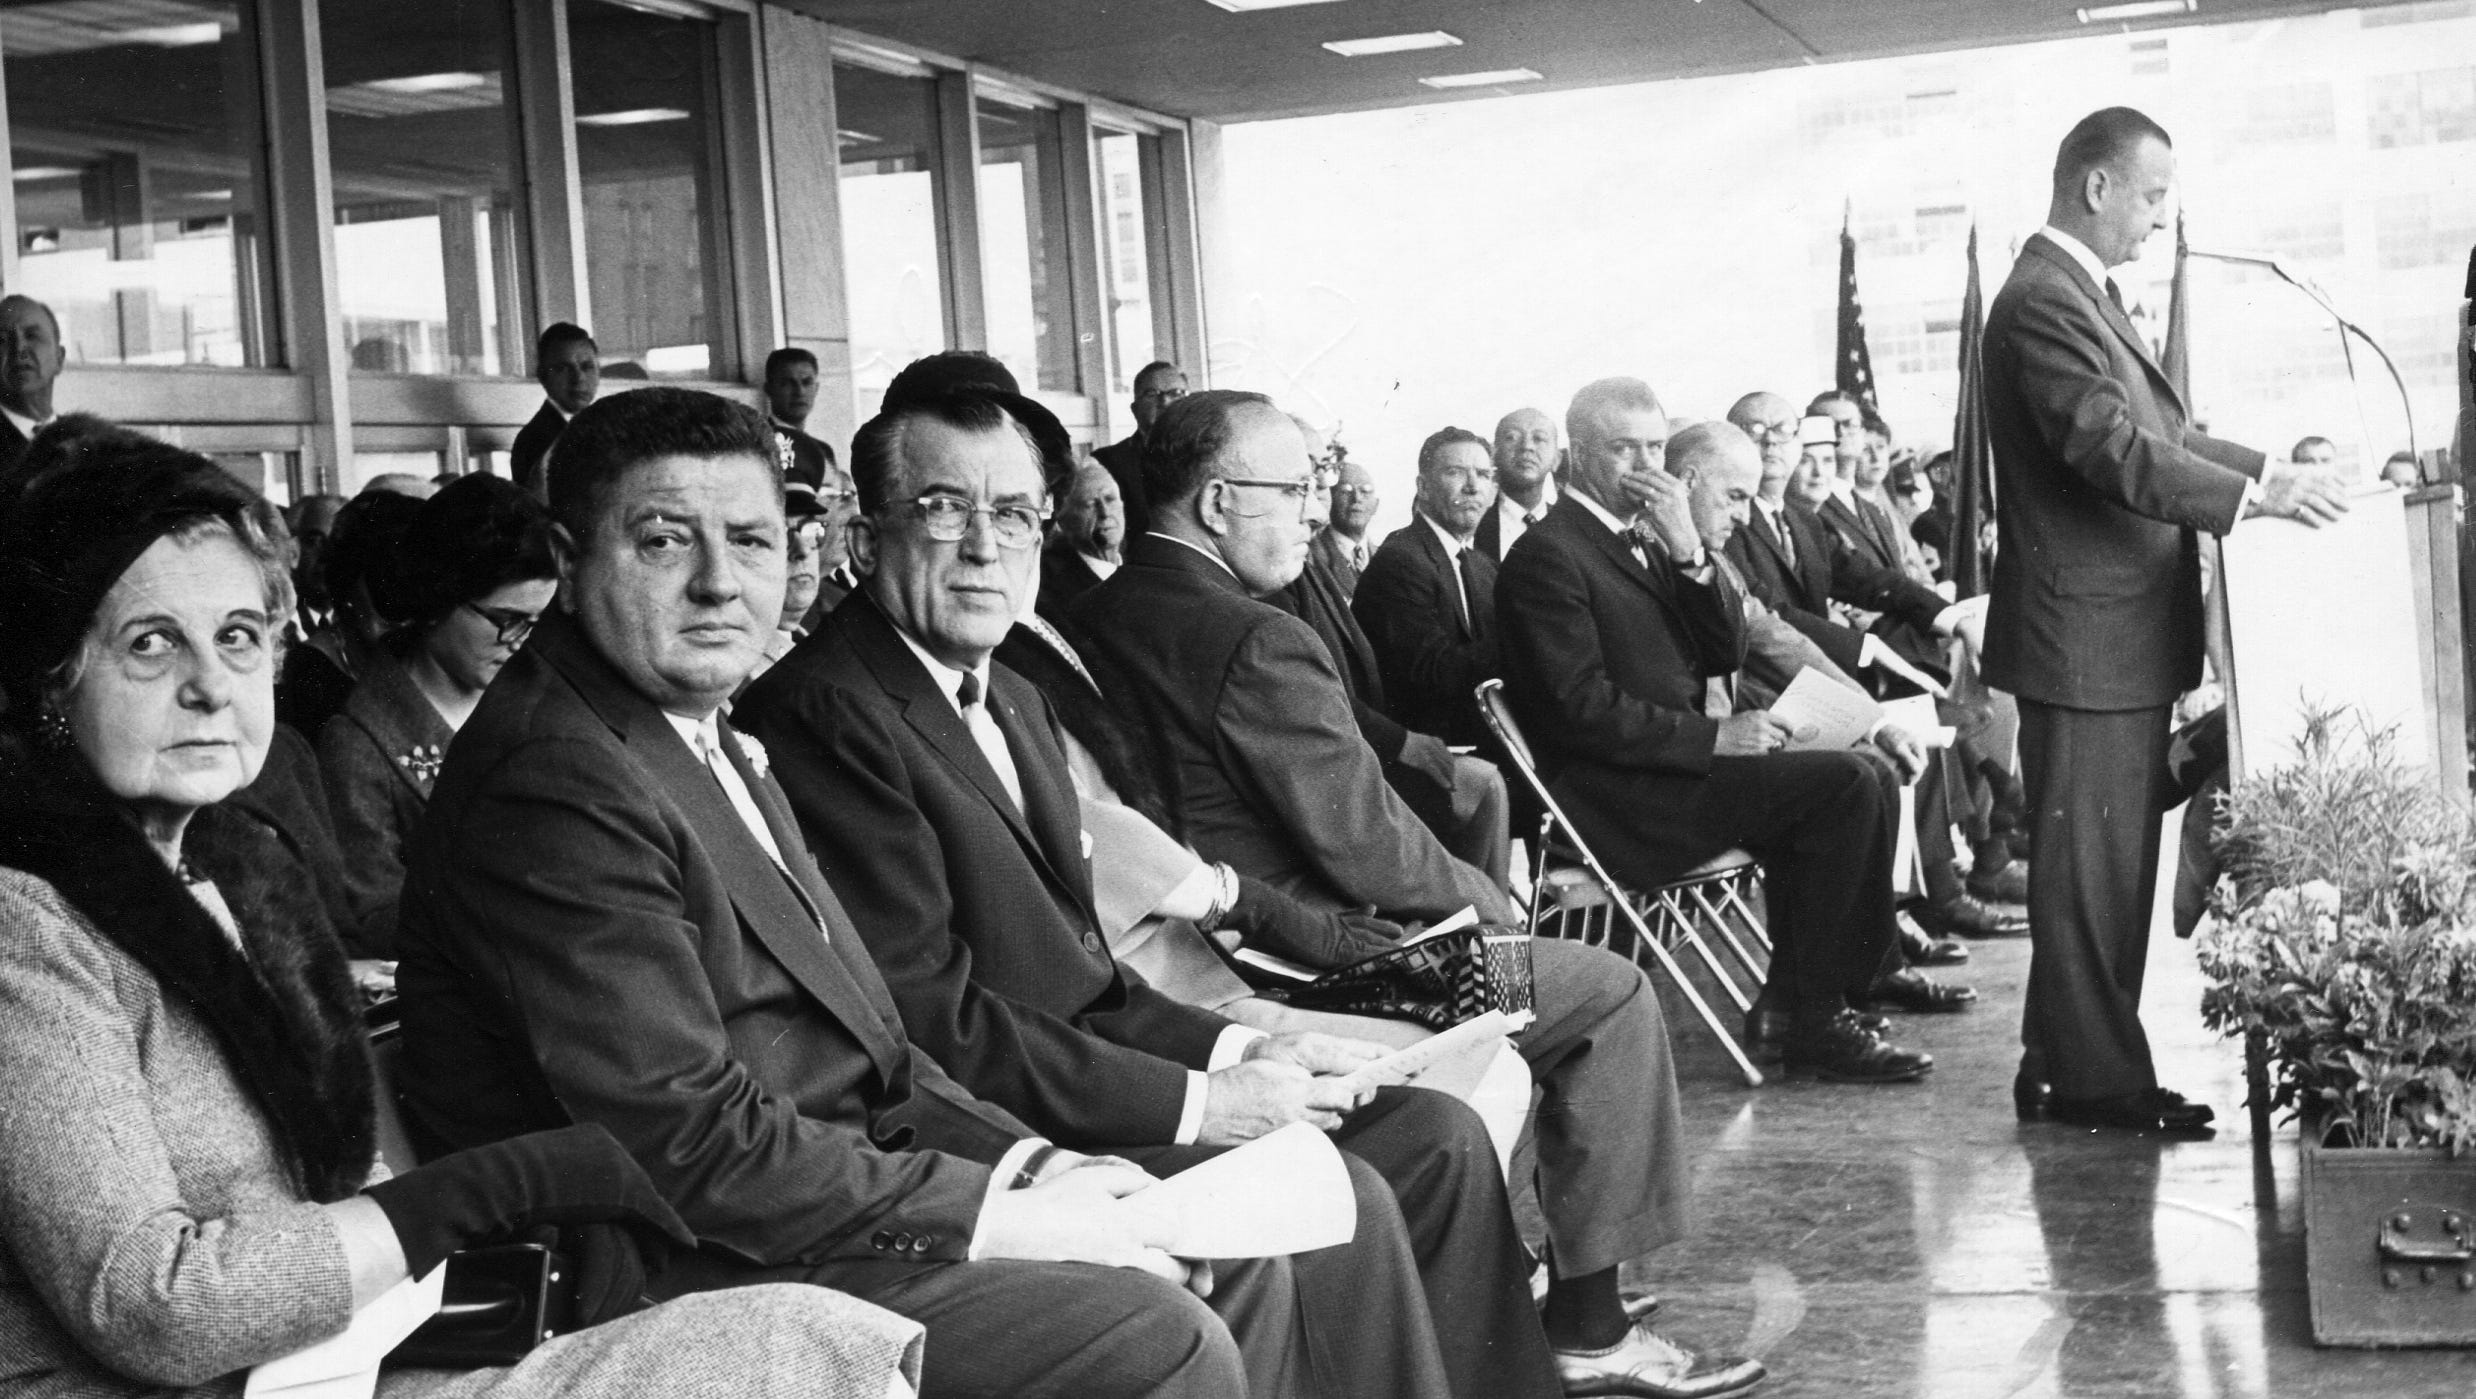 Local dignitaries take part in the dedication of Cobo Hall on Oct. 13, 1960.